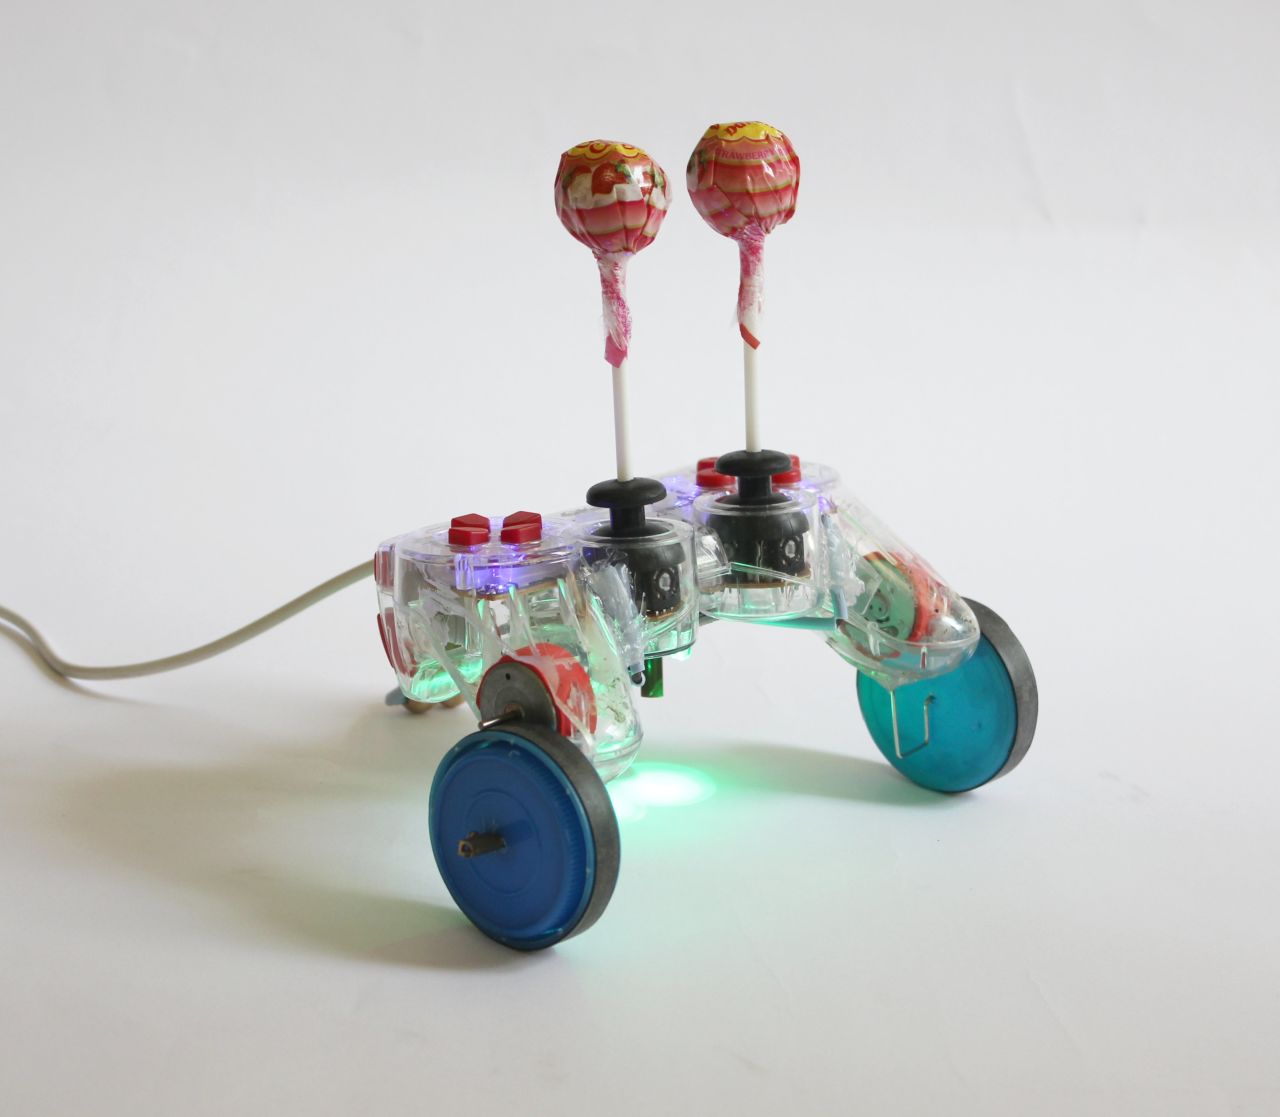 The "Lollybot" -- designed by Tom Tilley -- won the 2012 design challenge at the Ashesi Robotics Experience in Ghana.